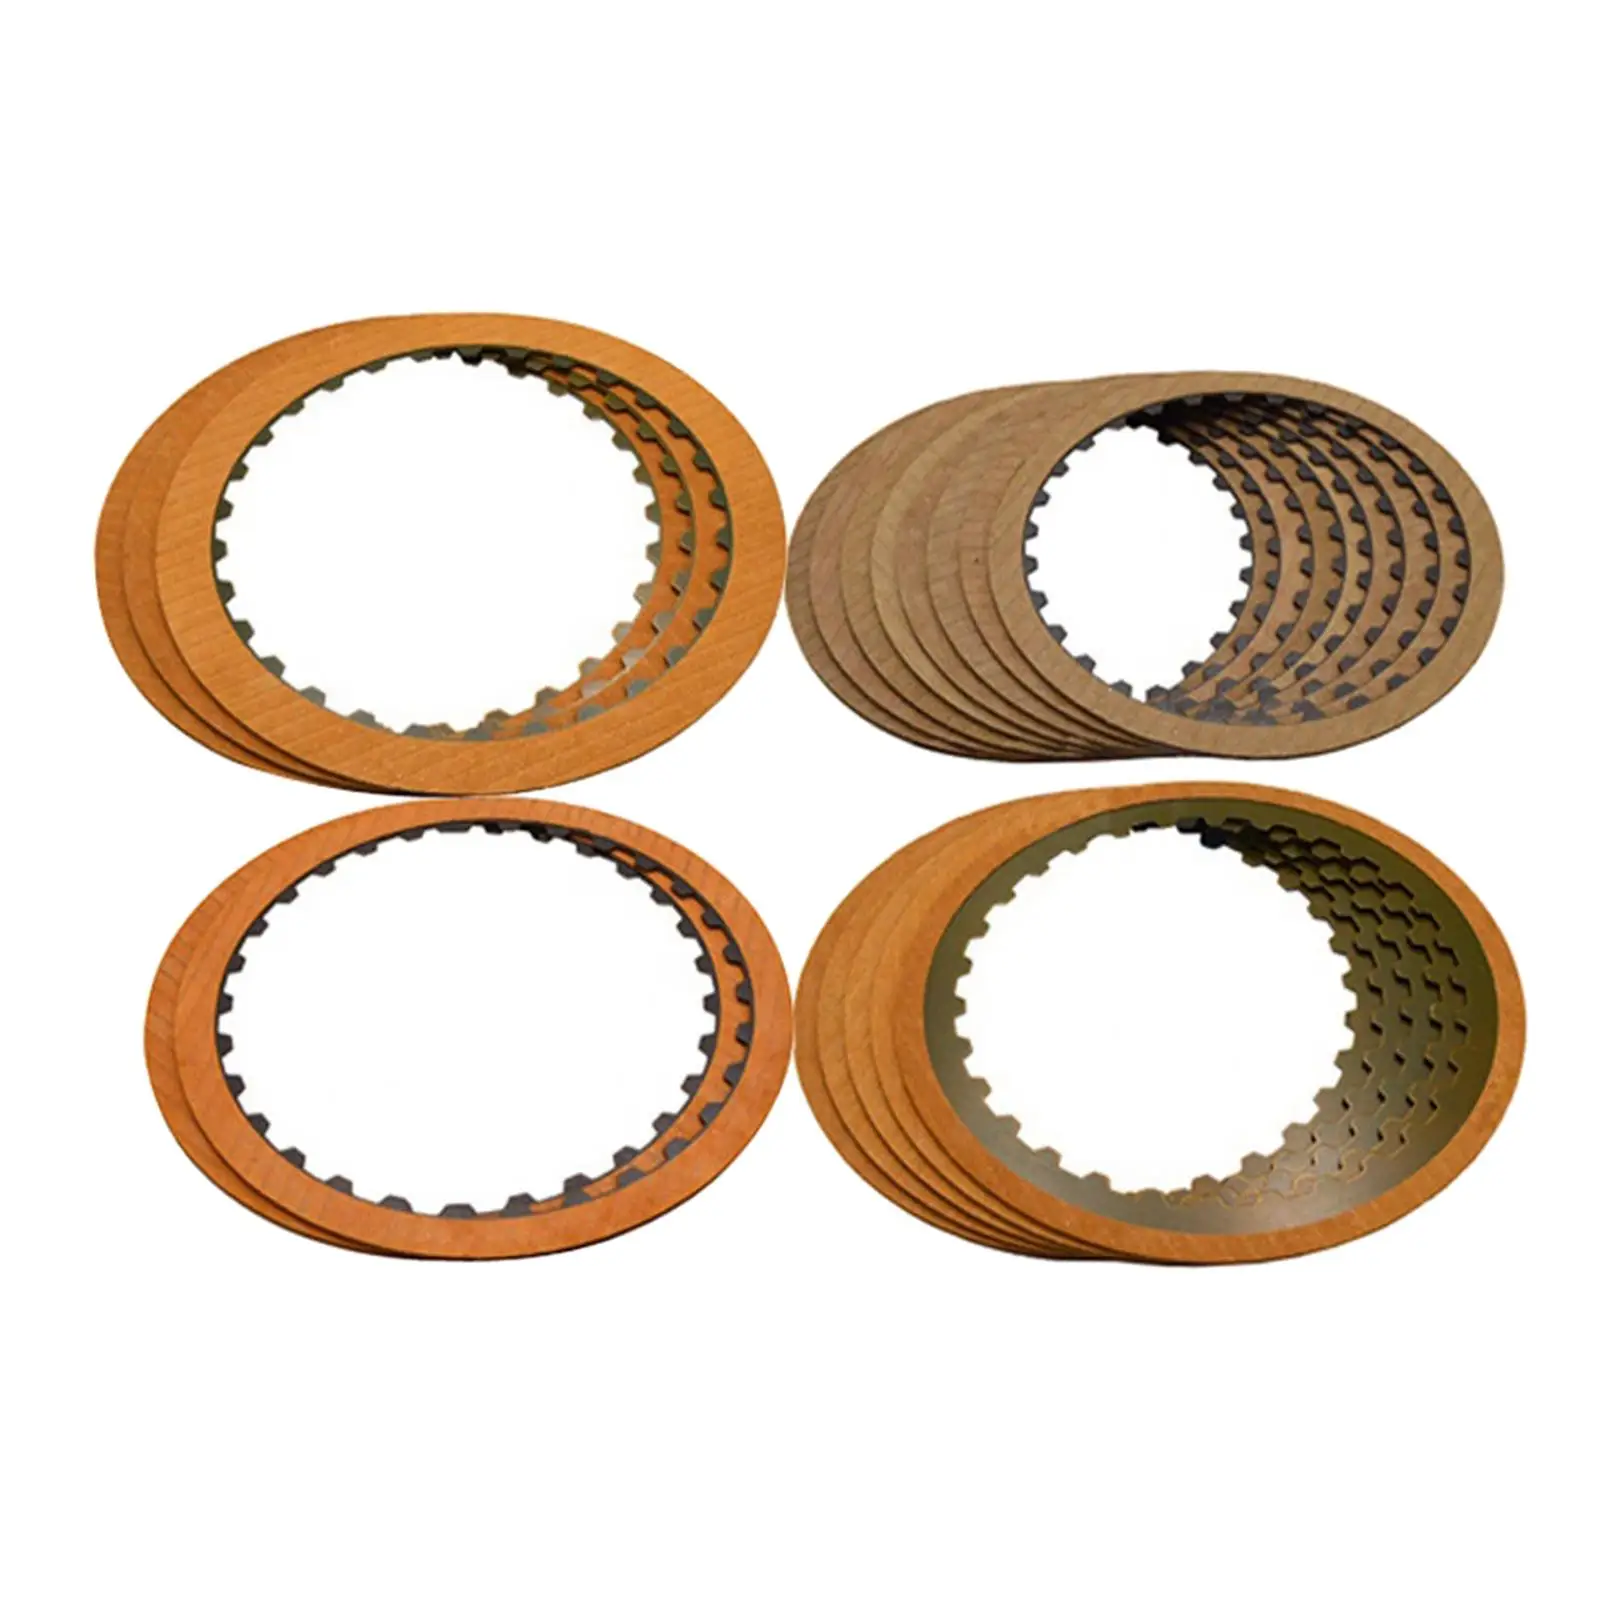 Vehicle Gearbox Friction Plates High Strength Premium Parts Transmission Clutch Plate Kit for Mitsubishi F5A51 V4A51 V5A51